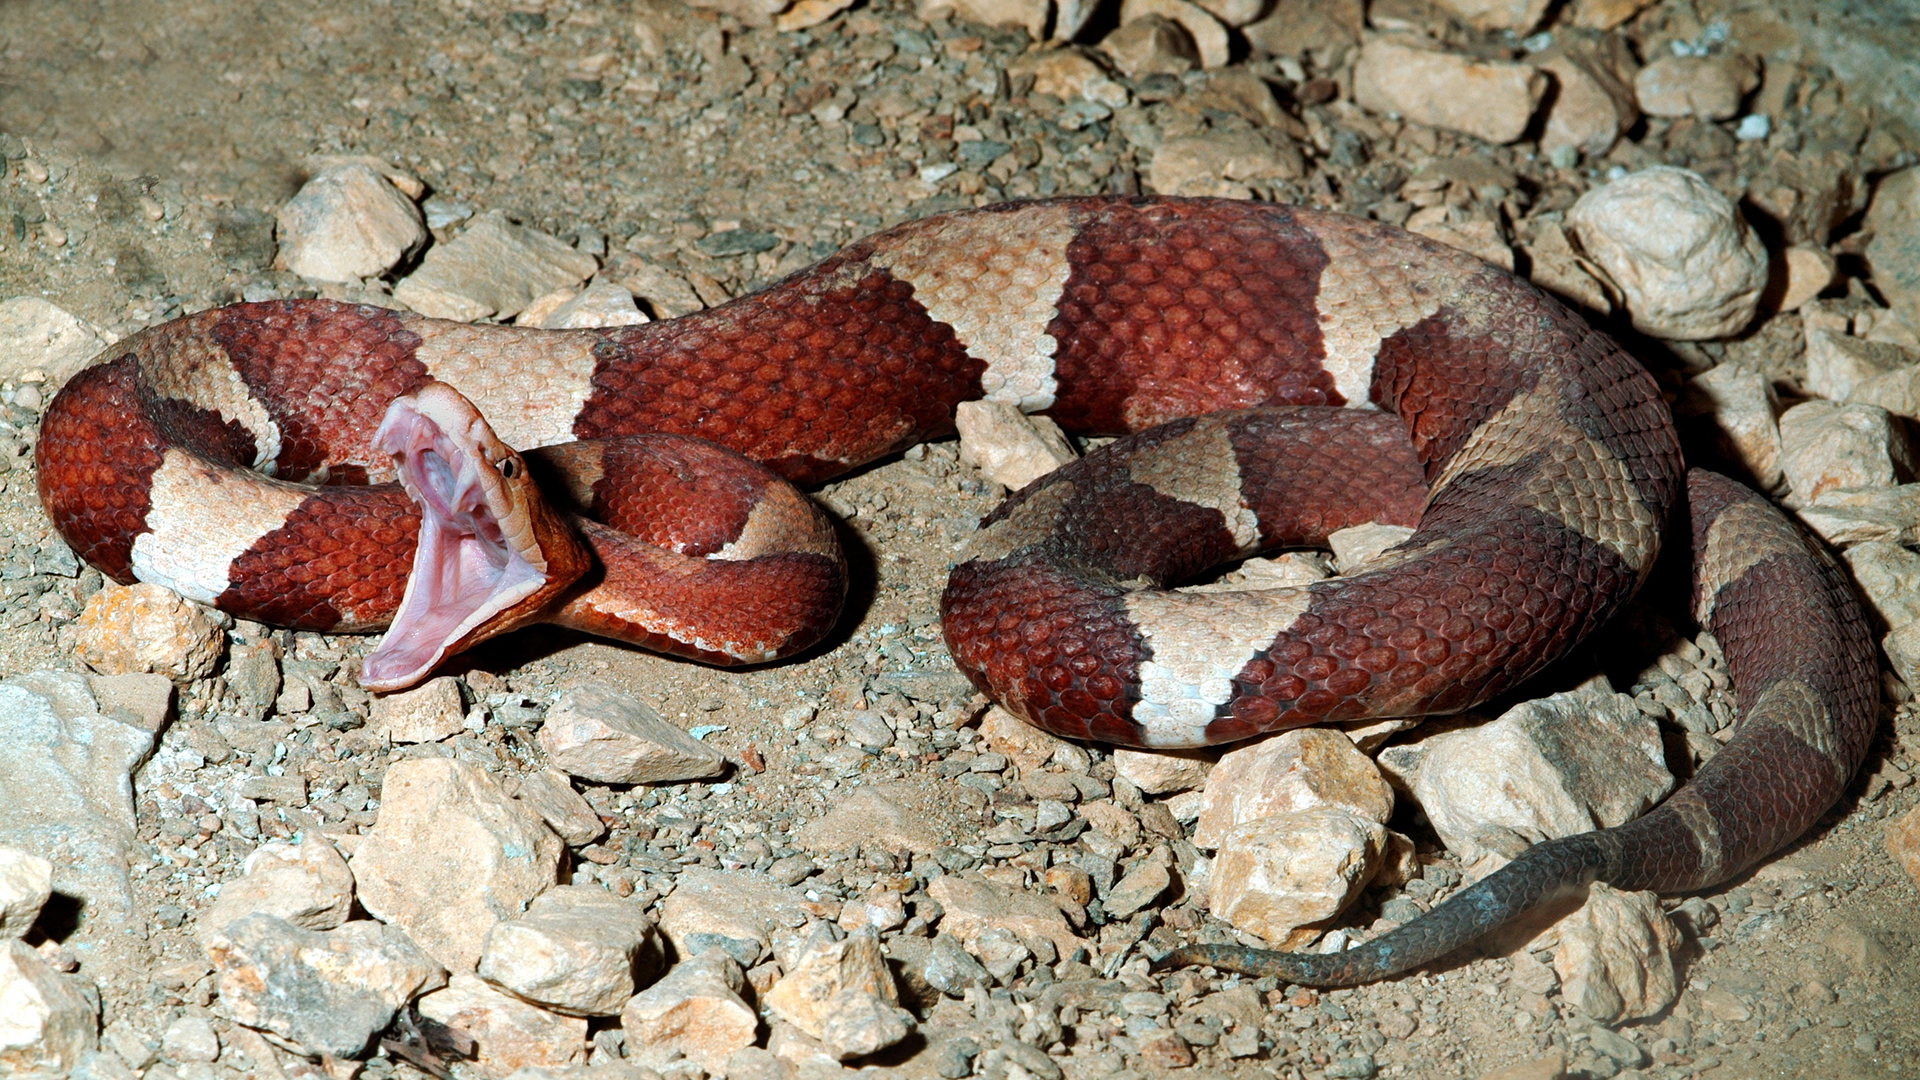 Unlike most venomous snakes, copperheads give no warning signs and strike almost immediately if they feel threatened.